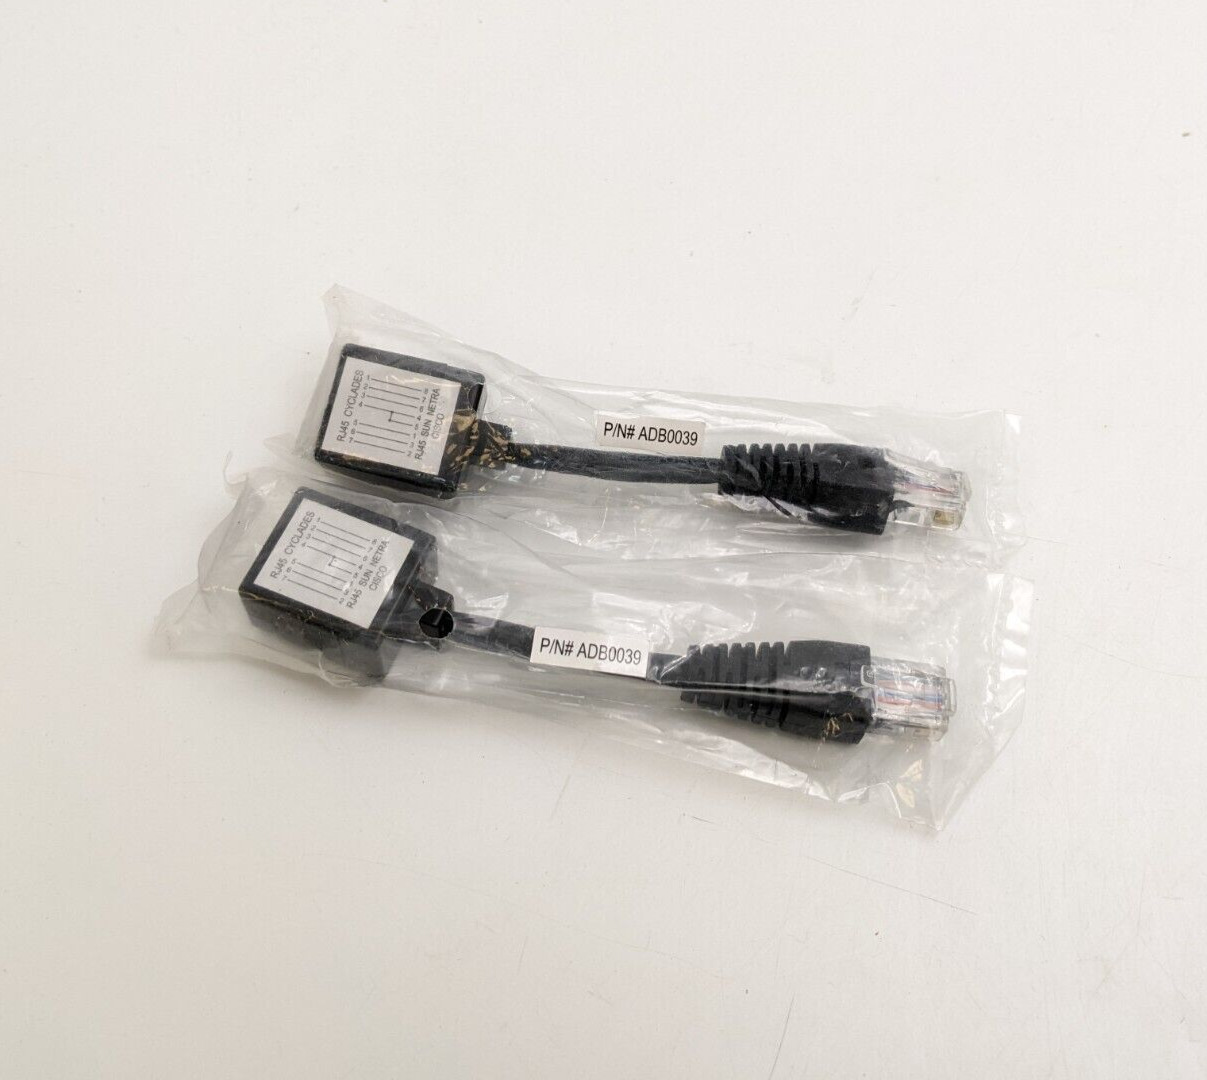 2PC Avocent ADB0039 Catalyst Crossover Adapter RJ45F to RJ45M Connector Cisco